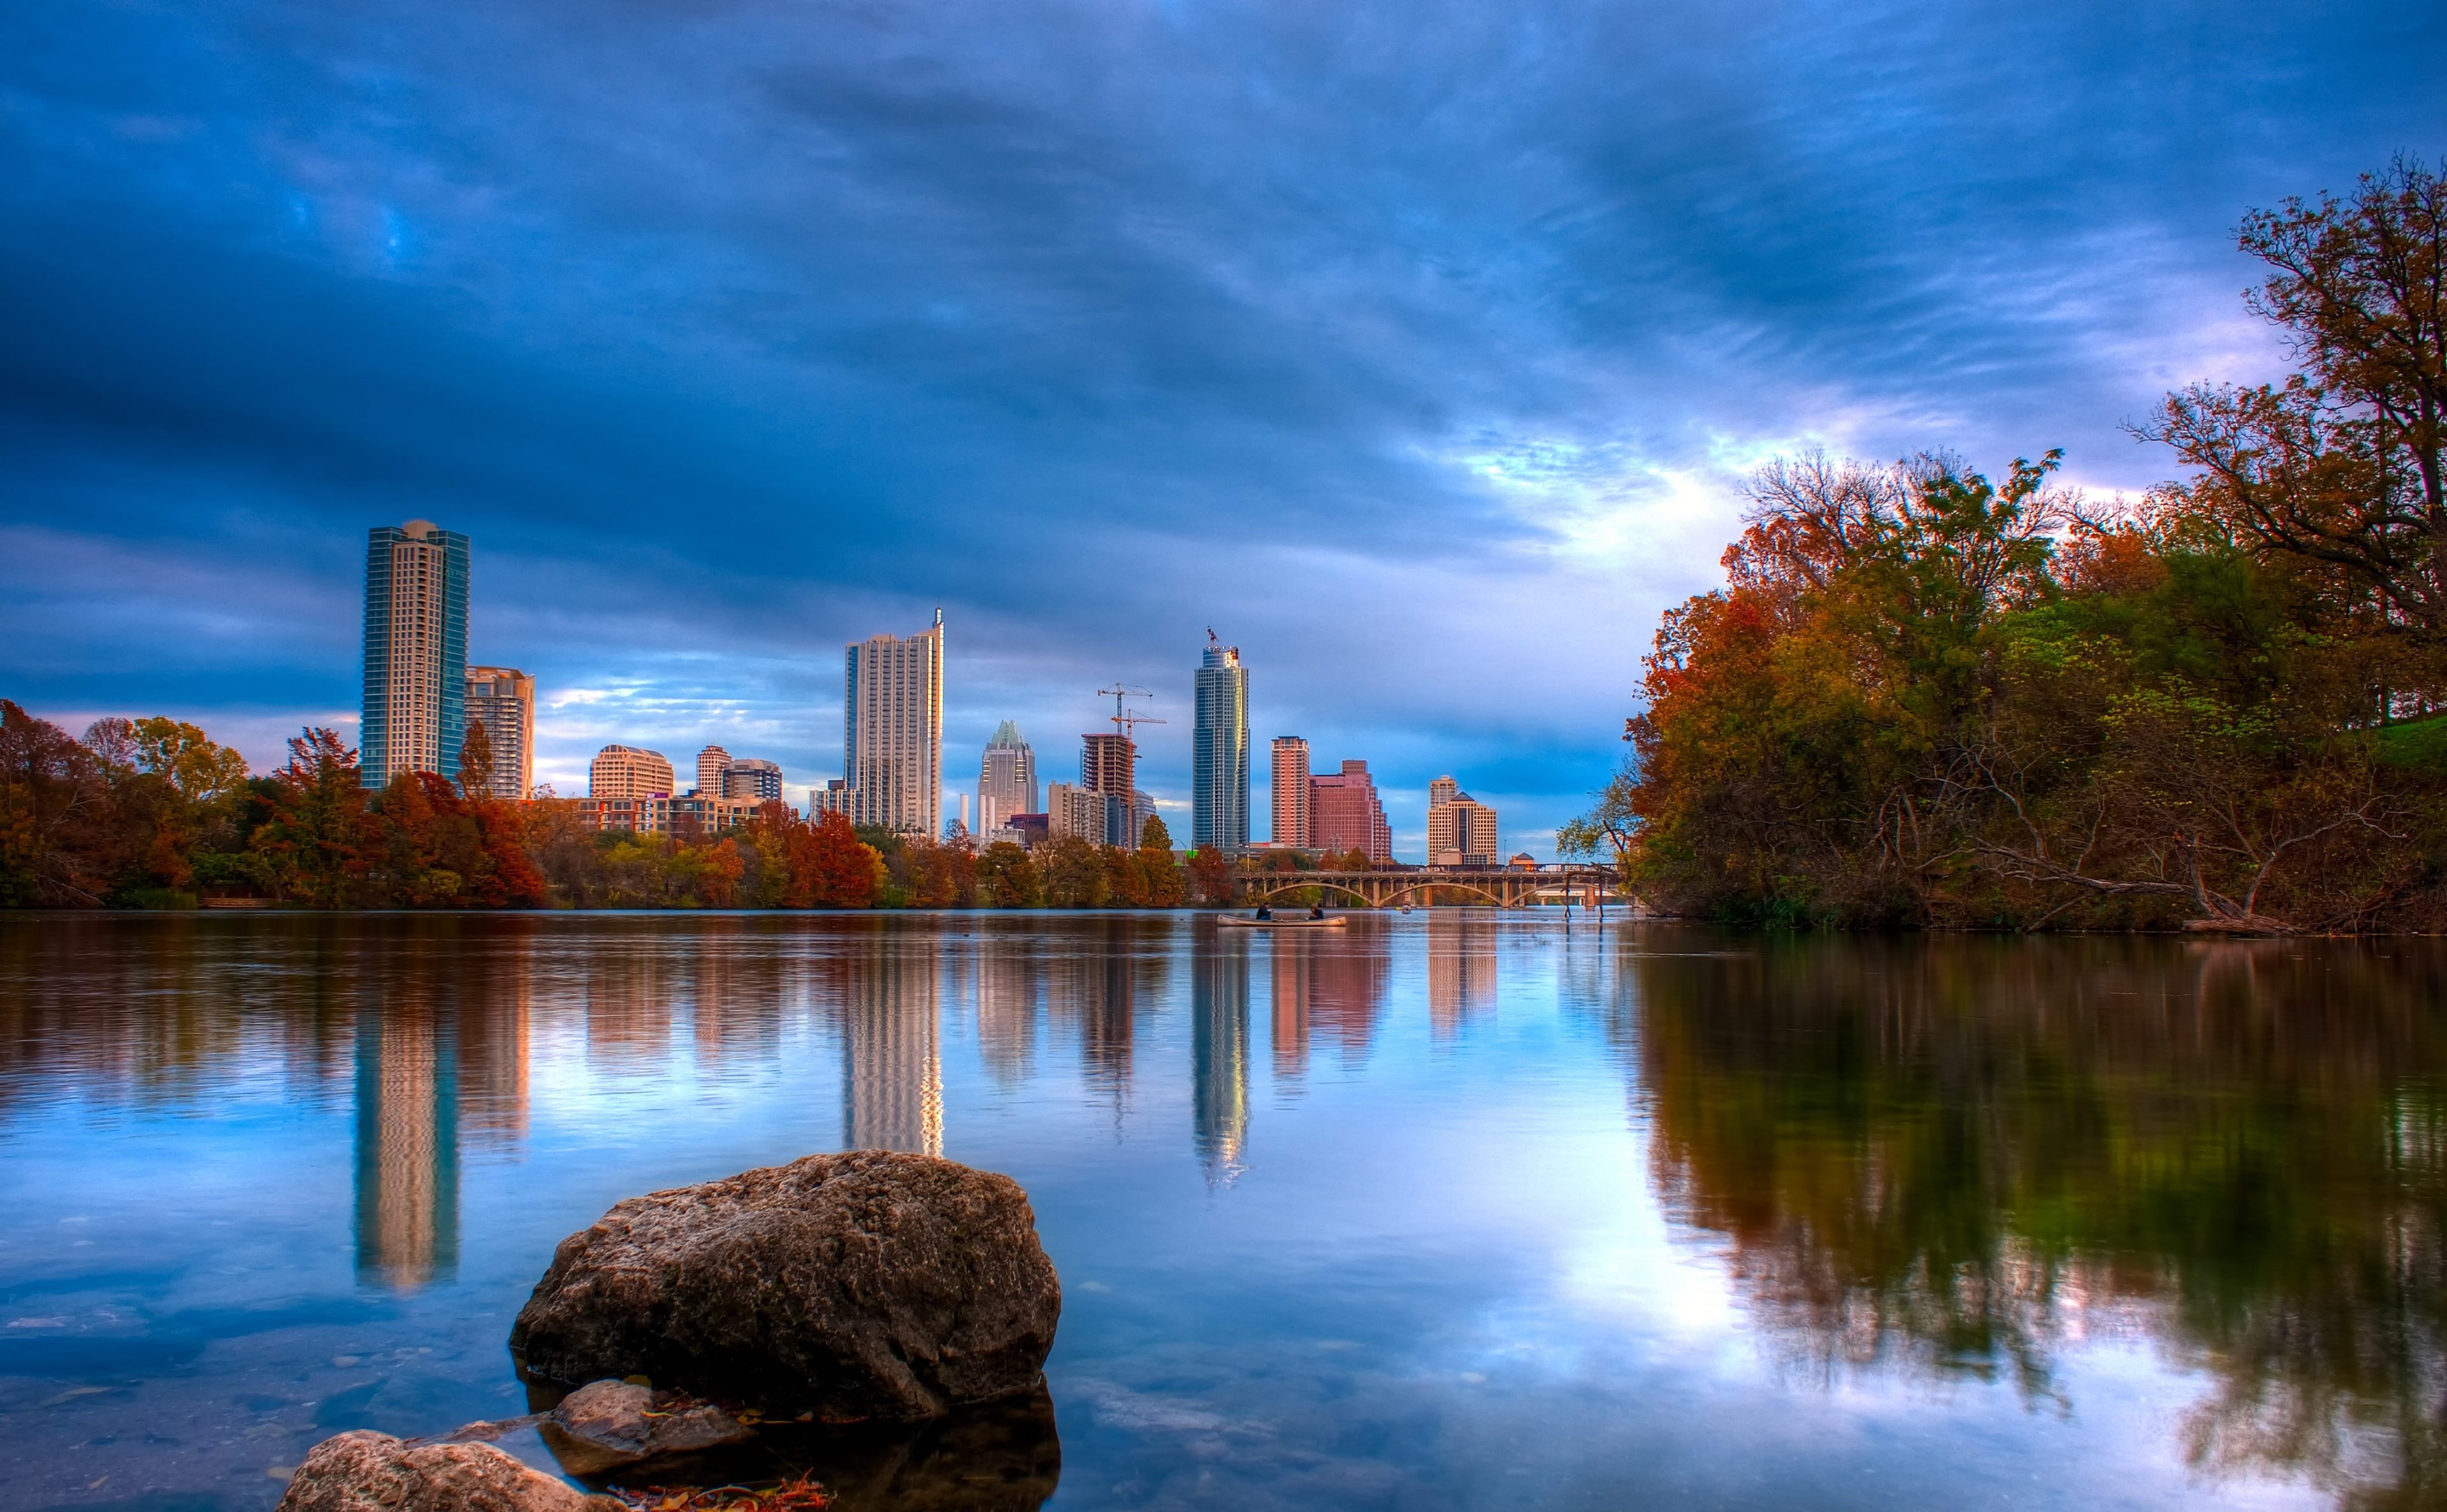 Lou Neff Point, body of water and high-rise buildings, United States